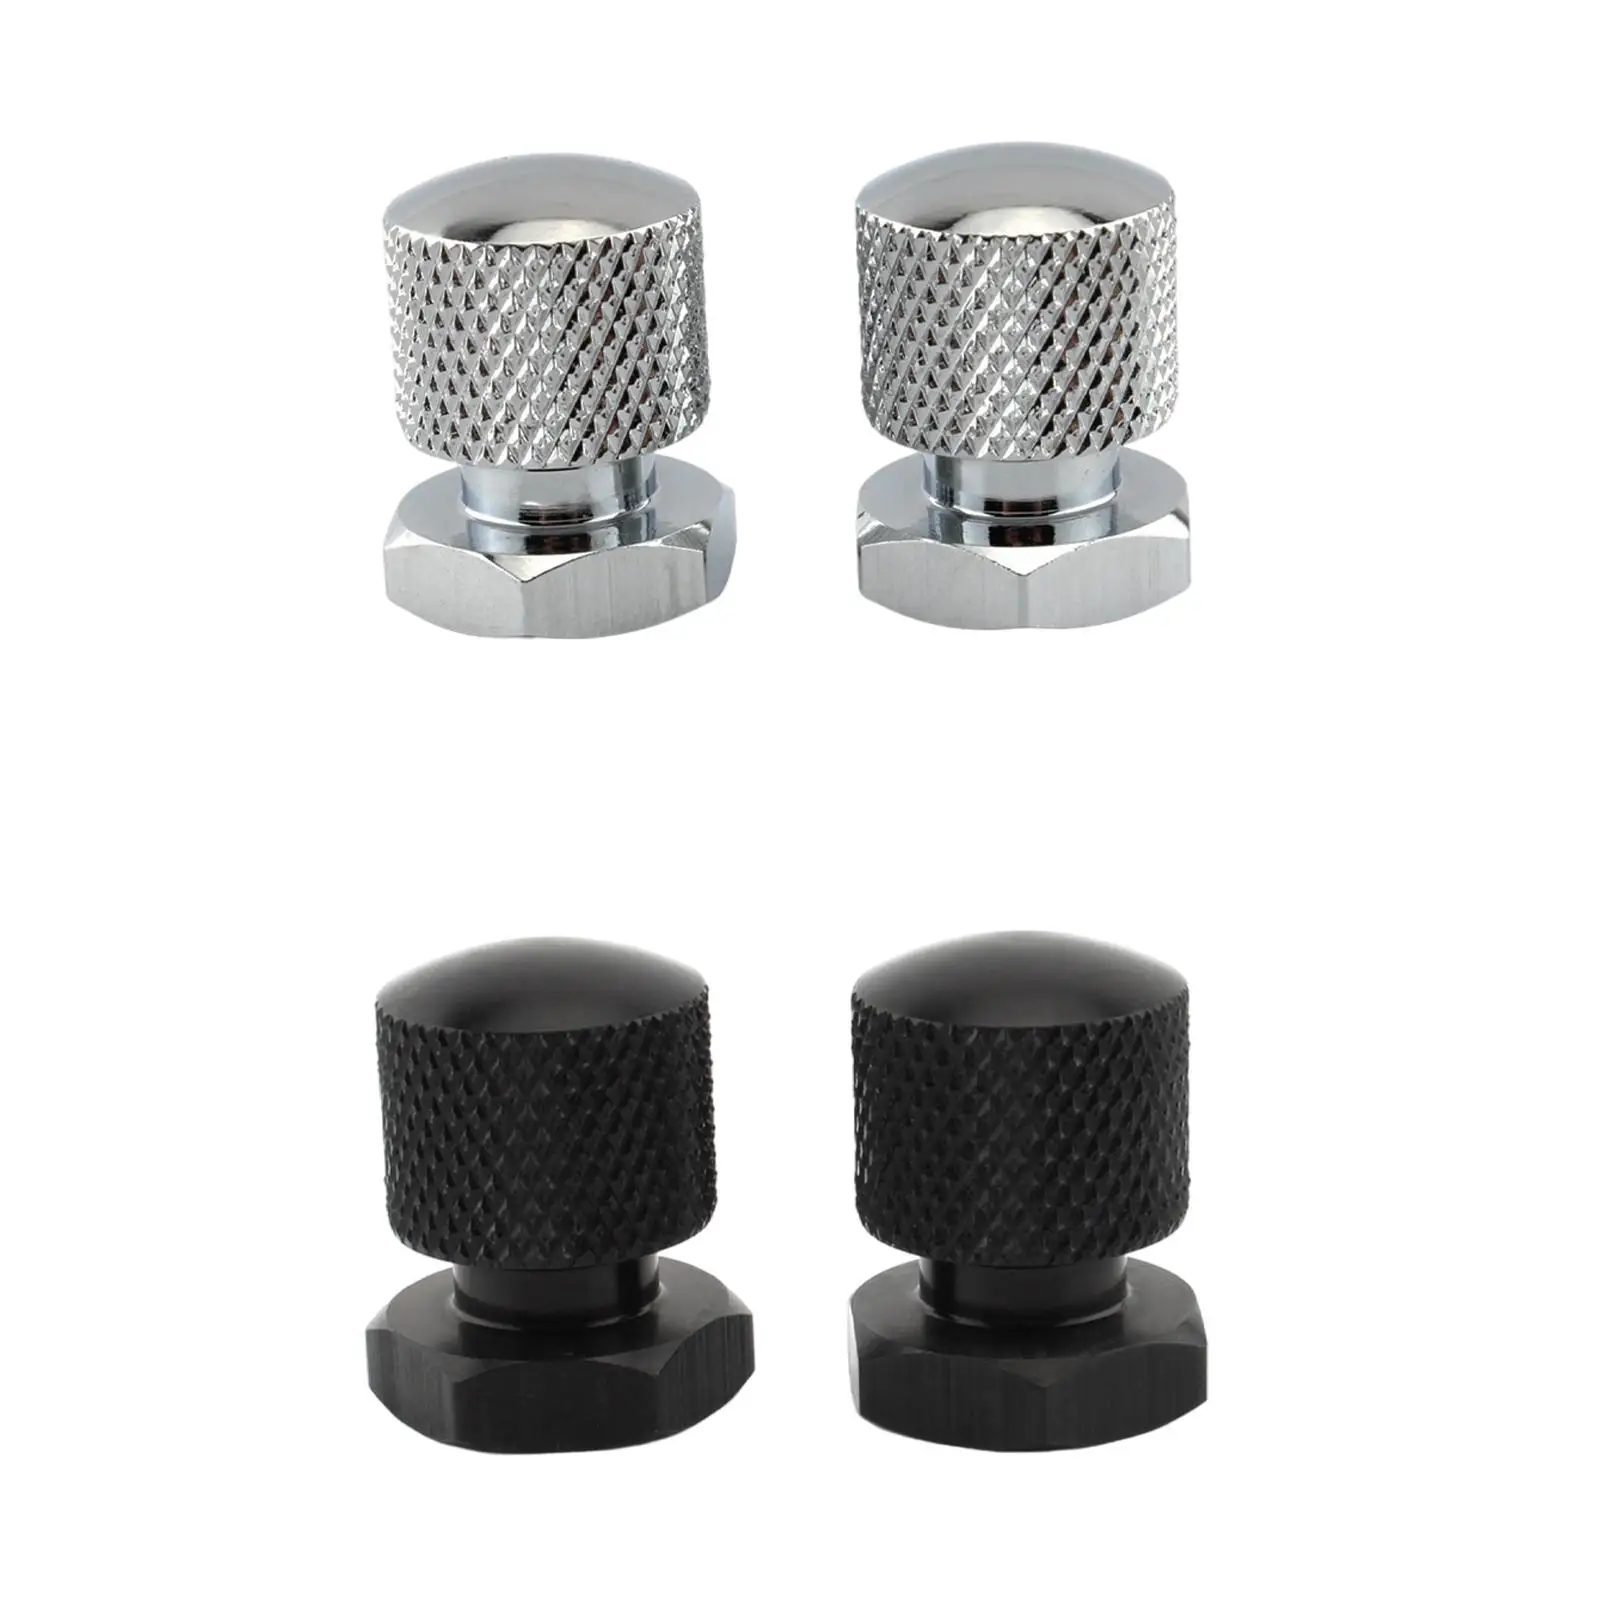 2x Seat Nuts Kit Mounting Decorations Fit for Road 18-22